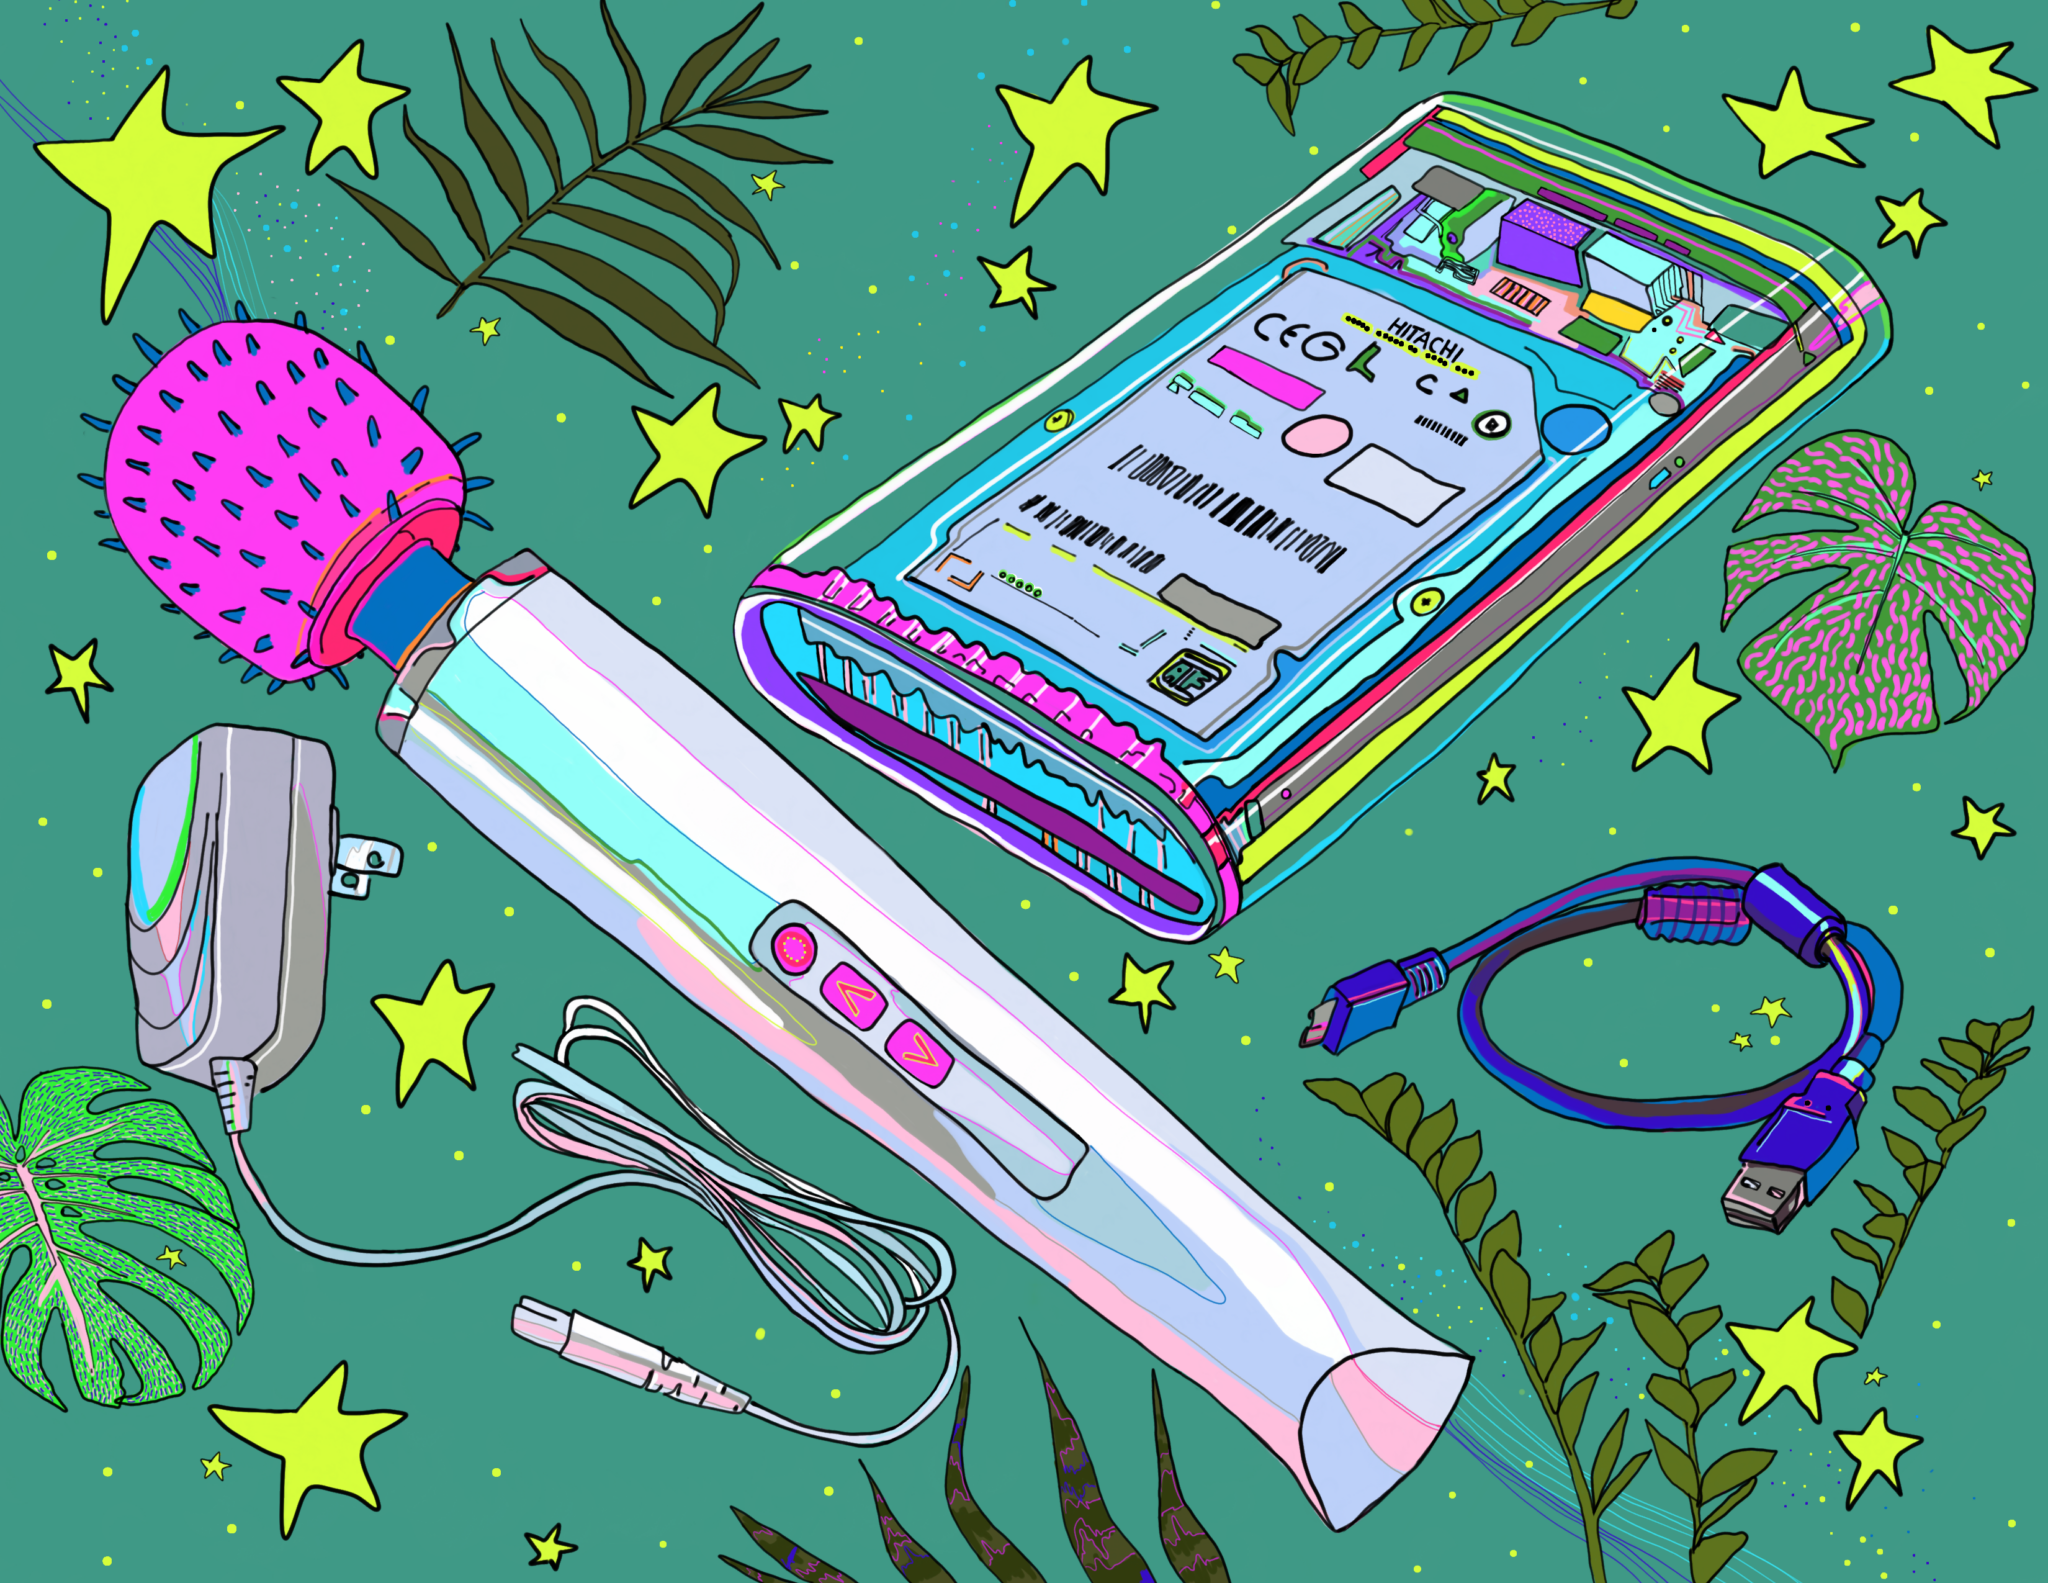 Megan Wirick's art piece of a Magic Wand vibrator and a Gameboy amongst leaves and cords on a dark green background.